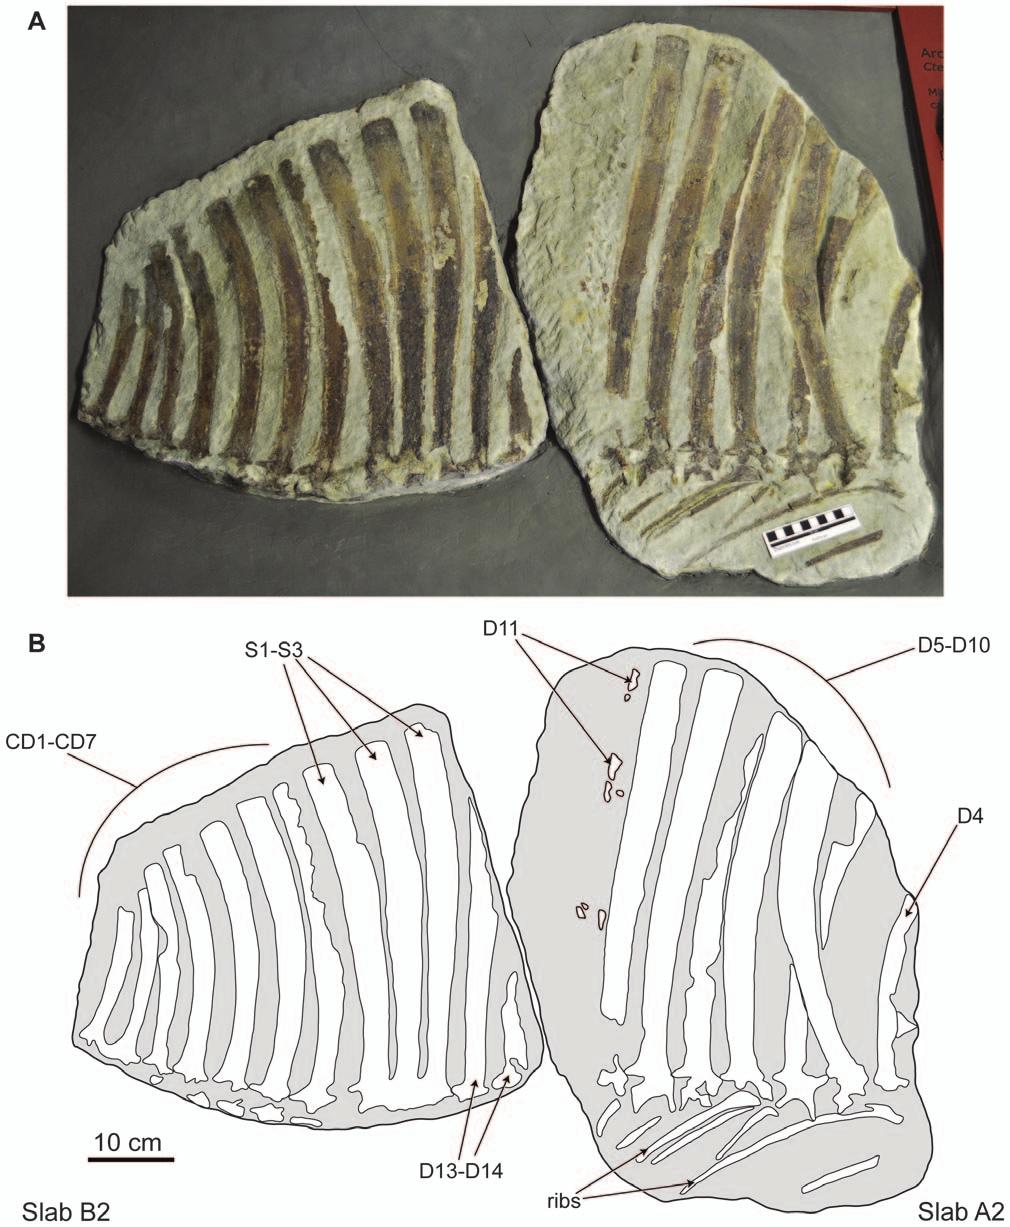 Figure 4. Holotype specimen of Ctenosauriscus koeneni (GZG.V.4191c d). Photograph (A) and interpretative drawing (B) of slabs A2 and B2, forming together the counterpart.